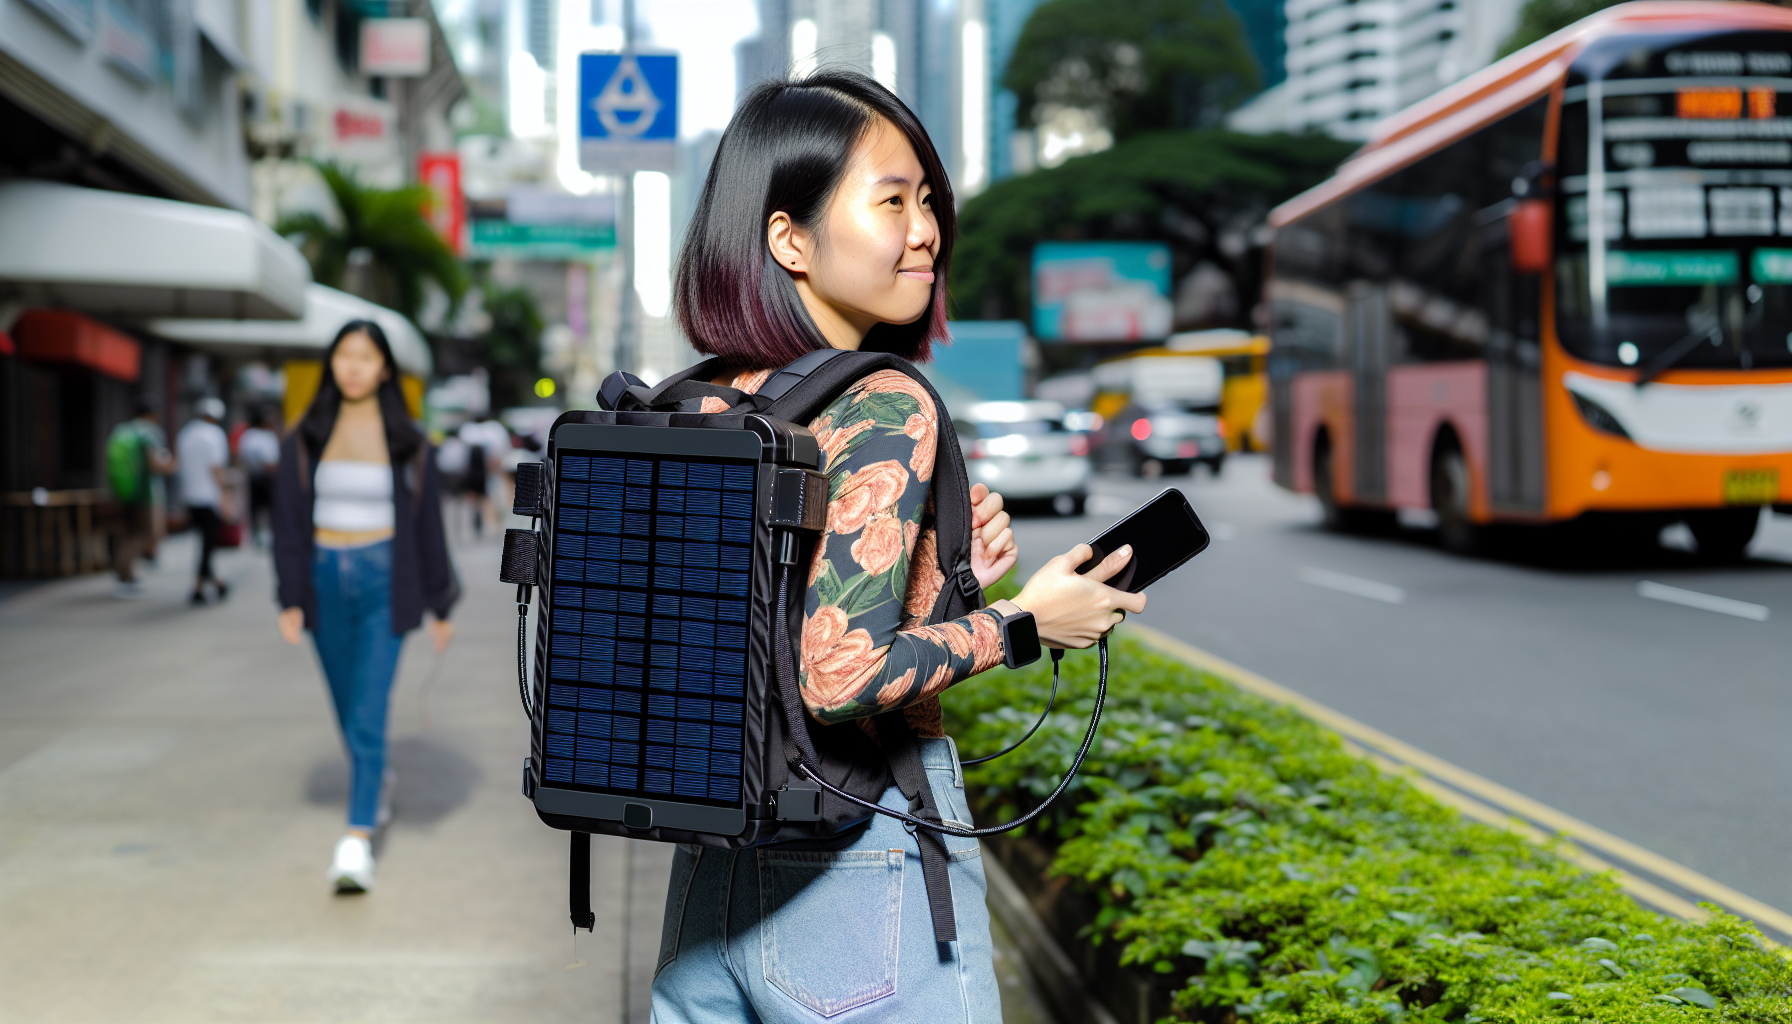 Charging devices using solar backpack